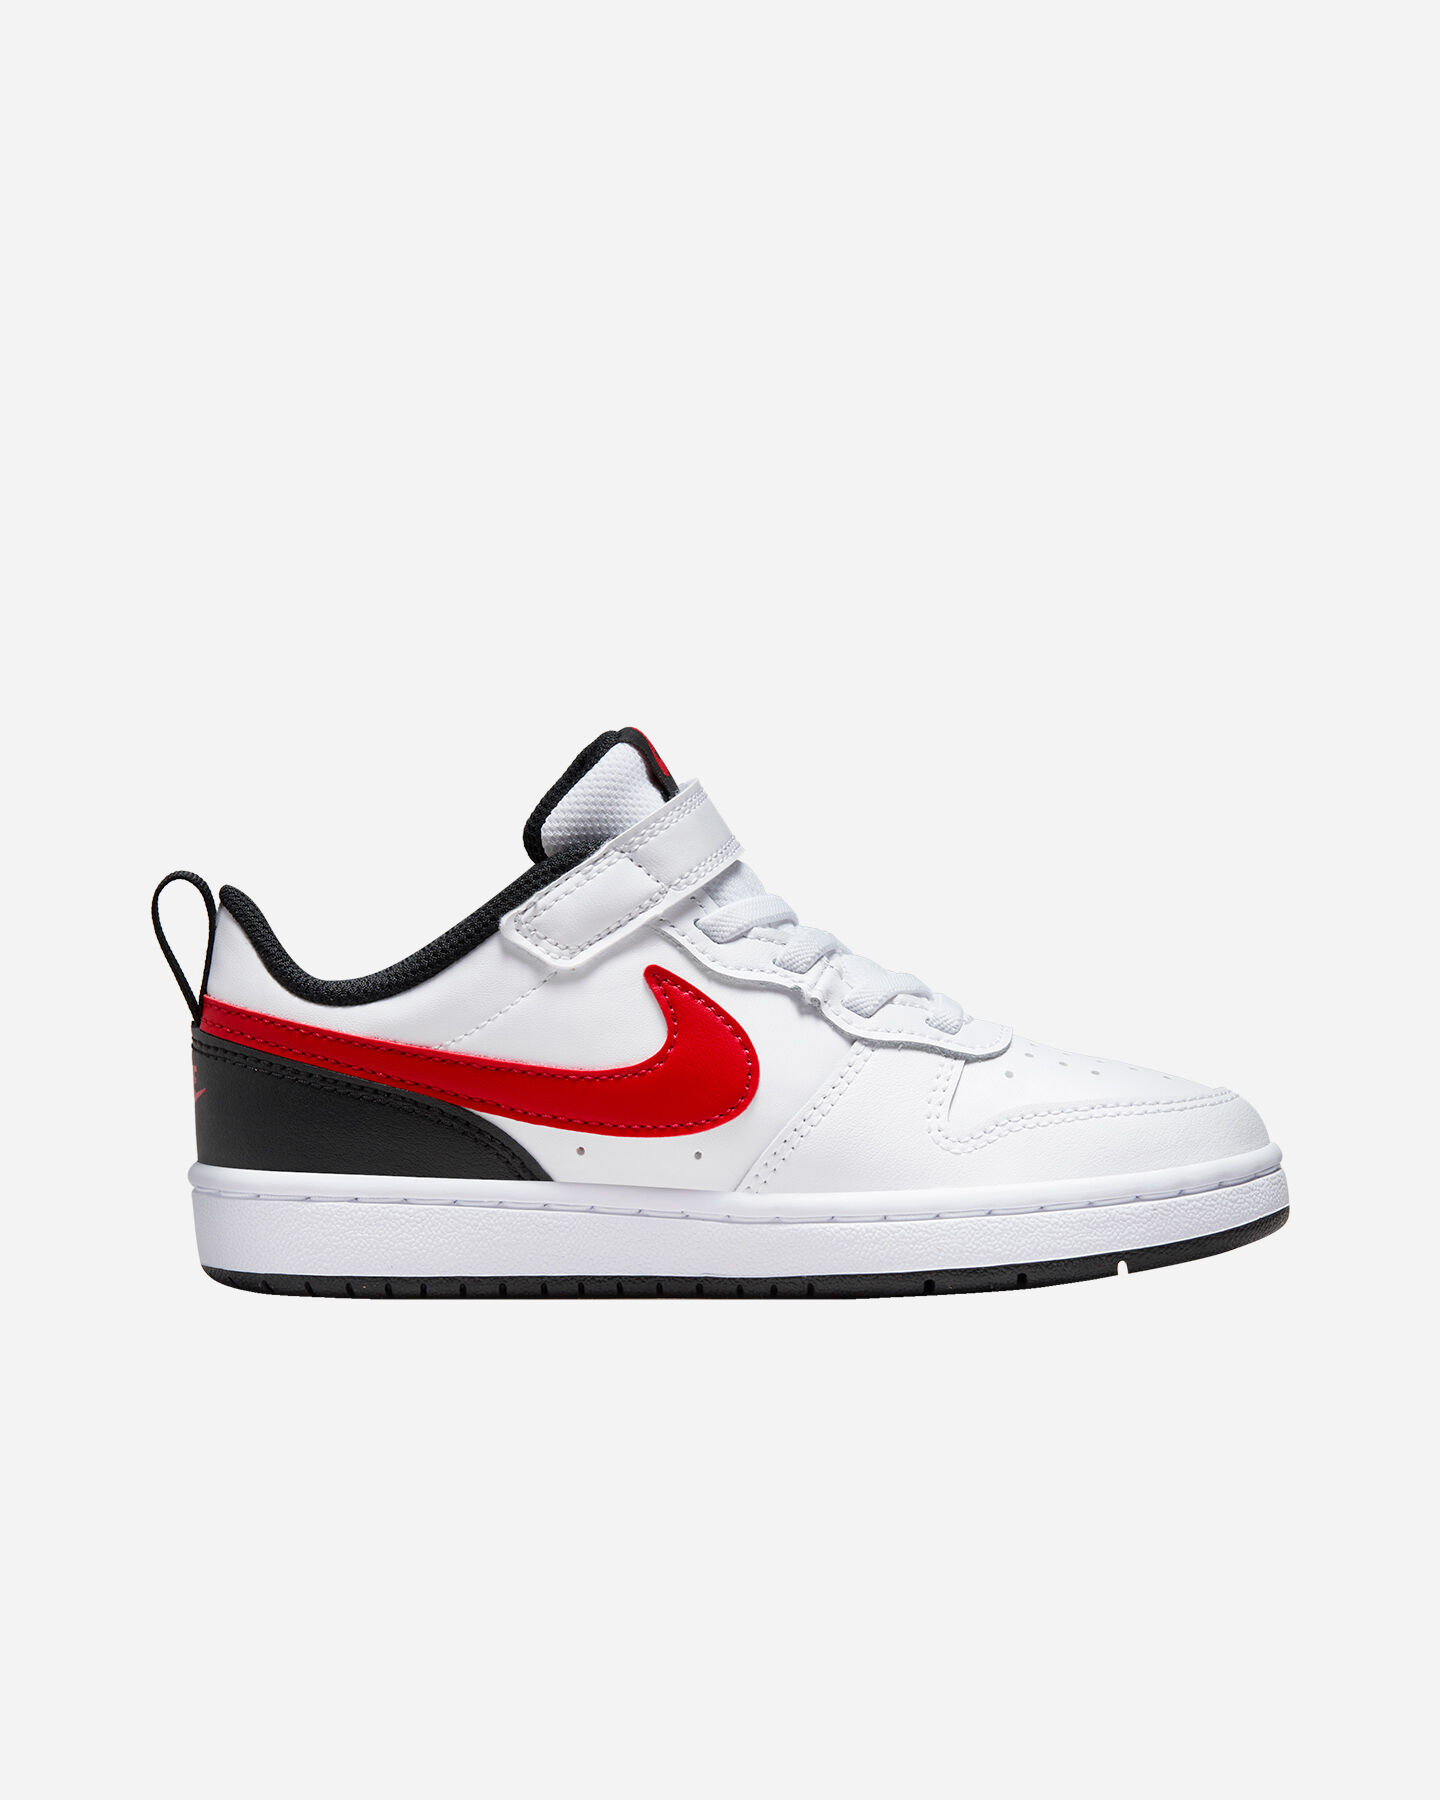  Scarpe sneakers NIKE COURT BOROUGH LOW 2 JR PS S5299997|110|1Y scatto 0